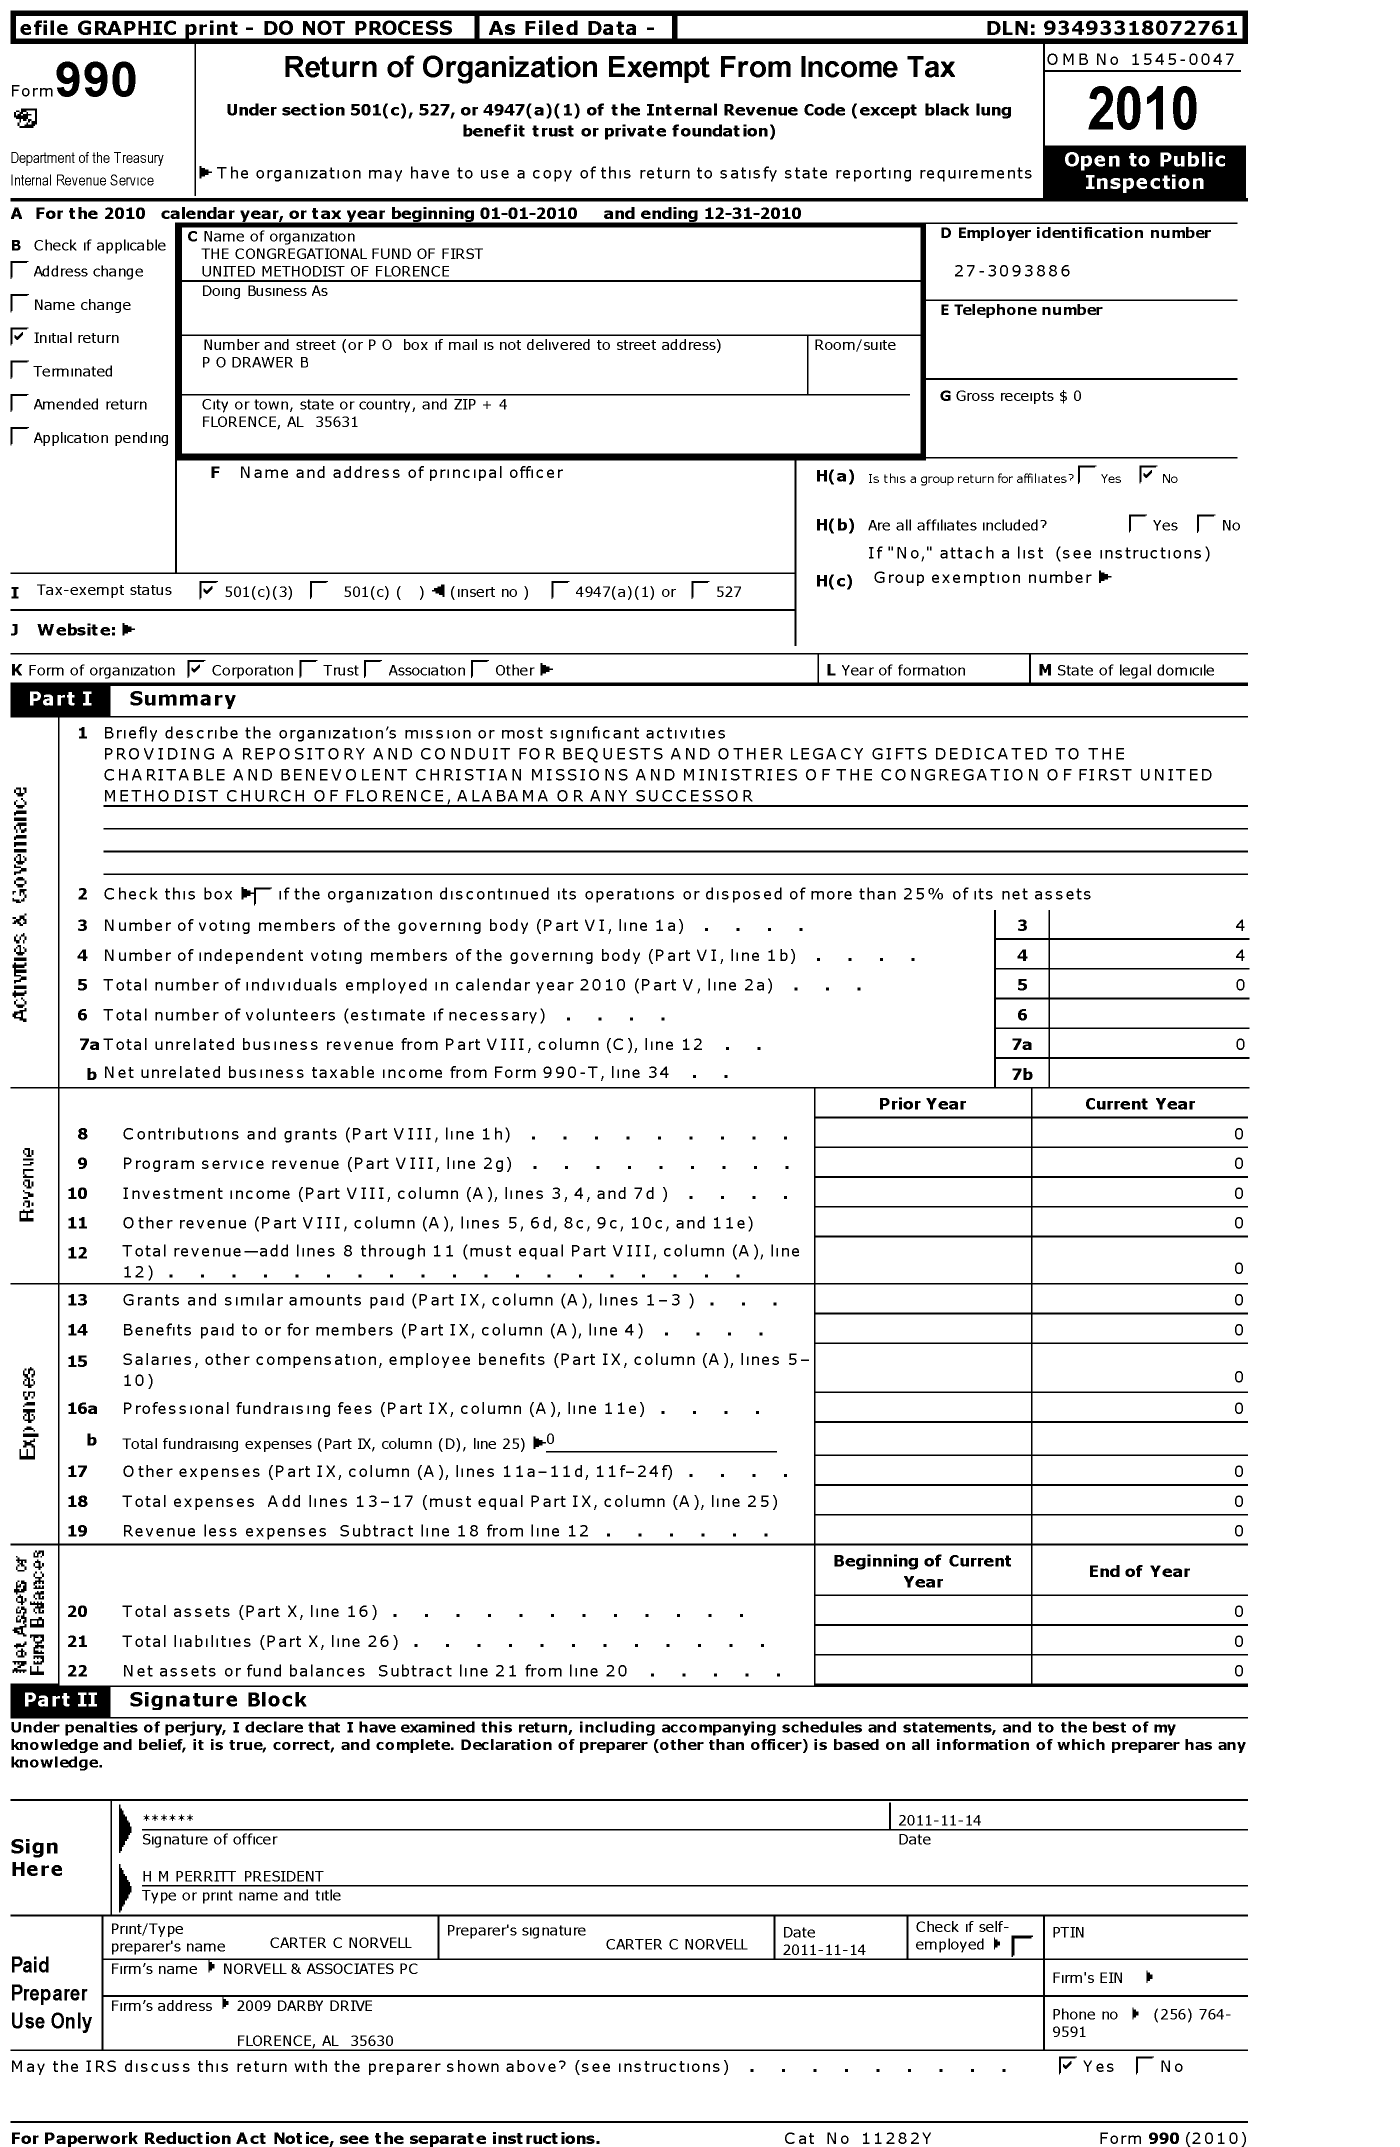 Image of first page of 2010 Form 990 for Congregational Fund of First United Methodist Church of Florence